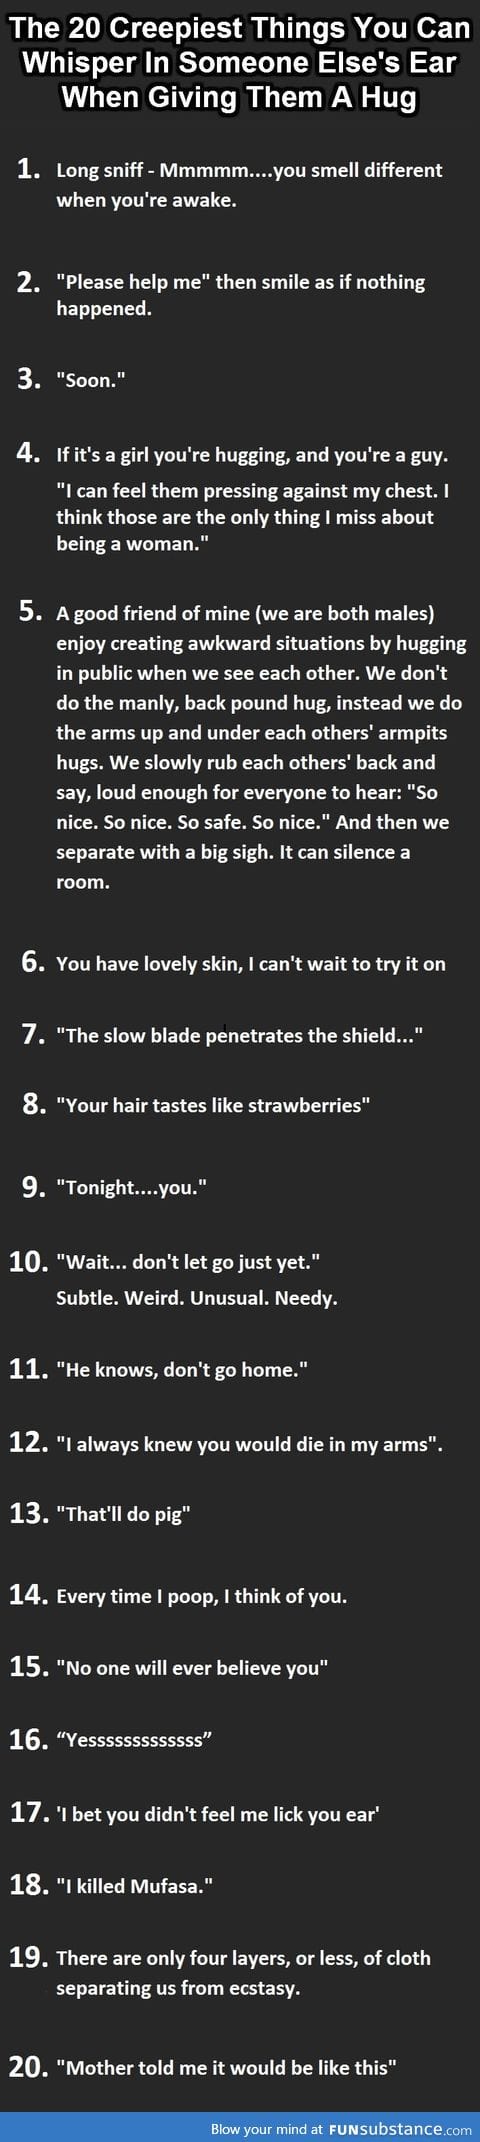 Creepy things you can whisper into someone's ear while hugging them